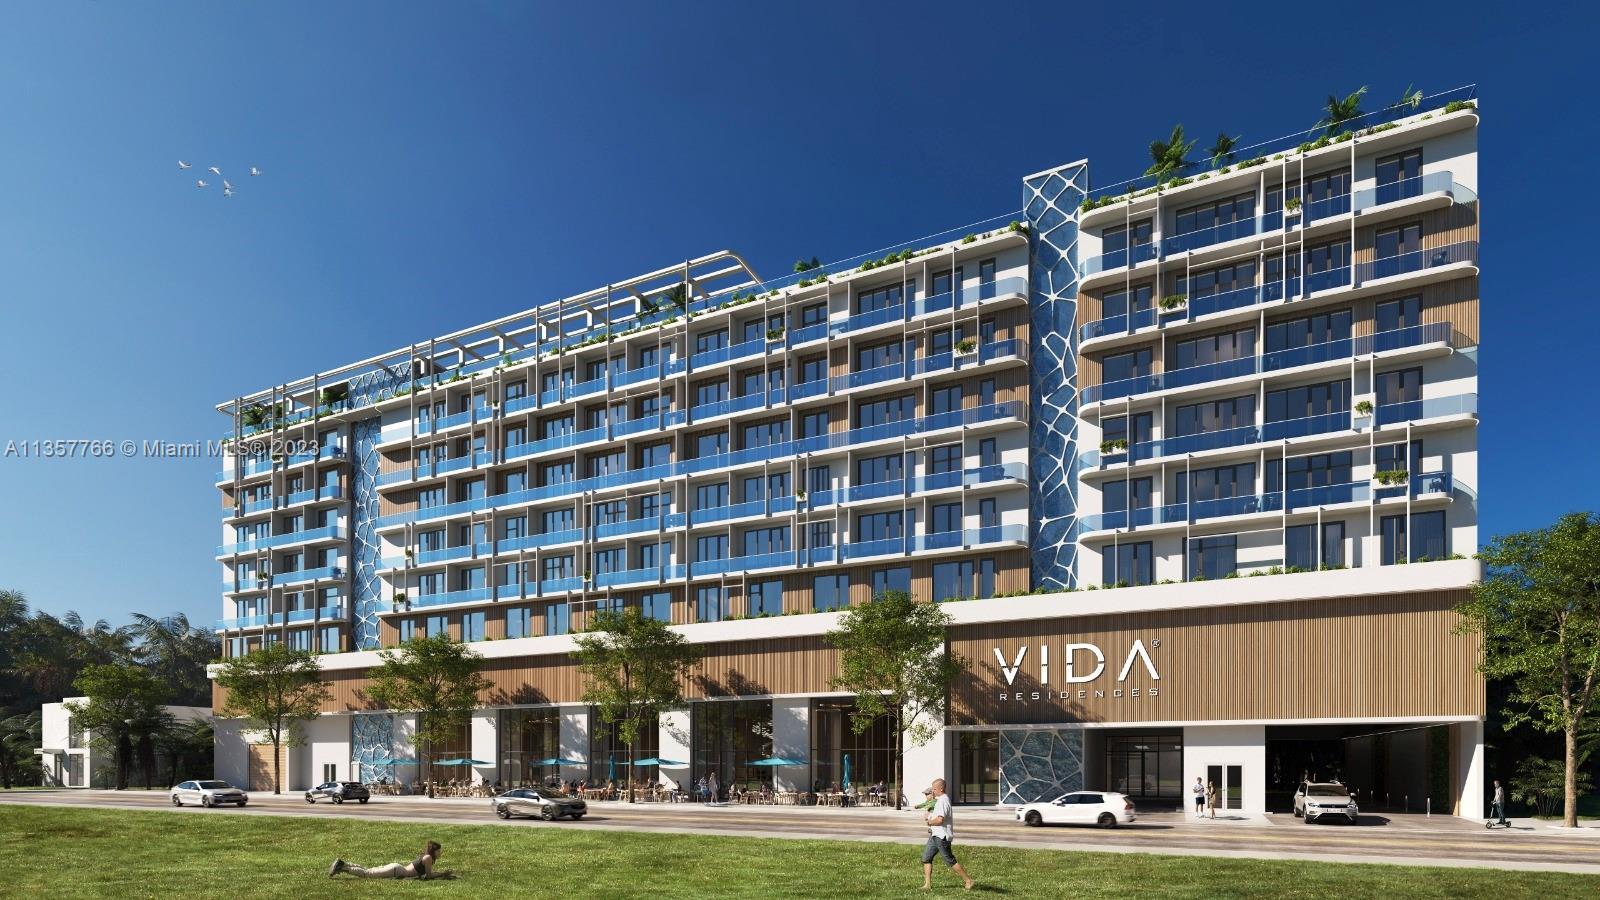 Positioned in Miami's most magnetic locale, we introduce Vida-Edgewater Residences,with a vibrant an